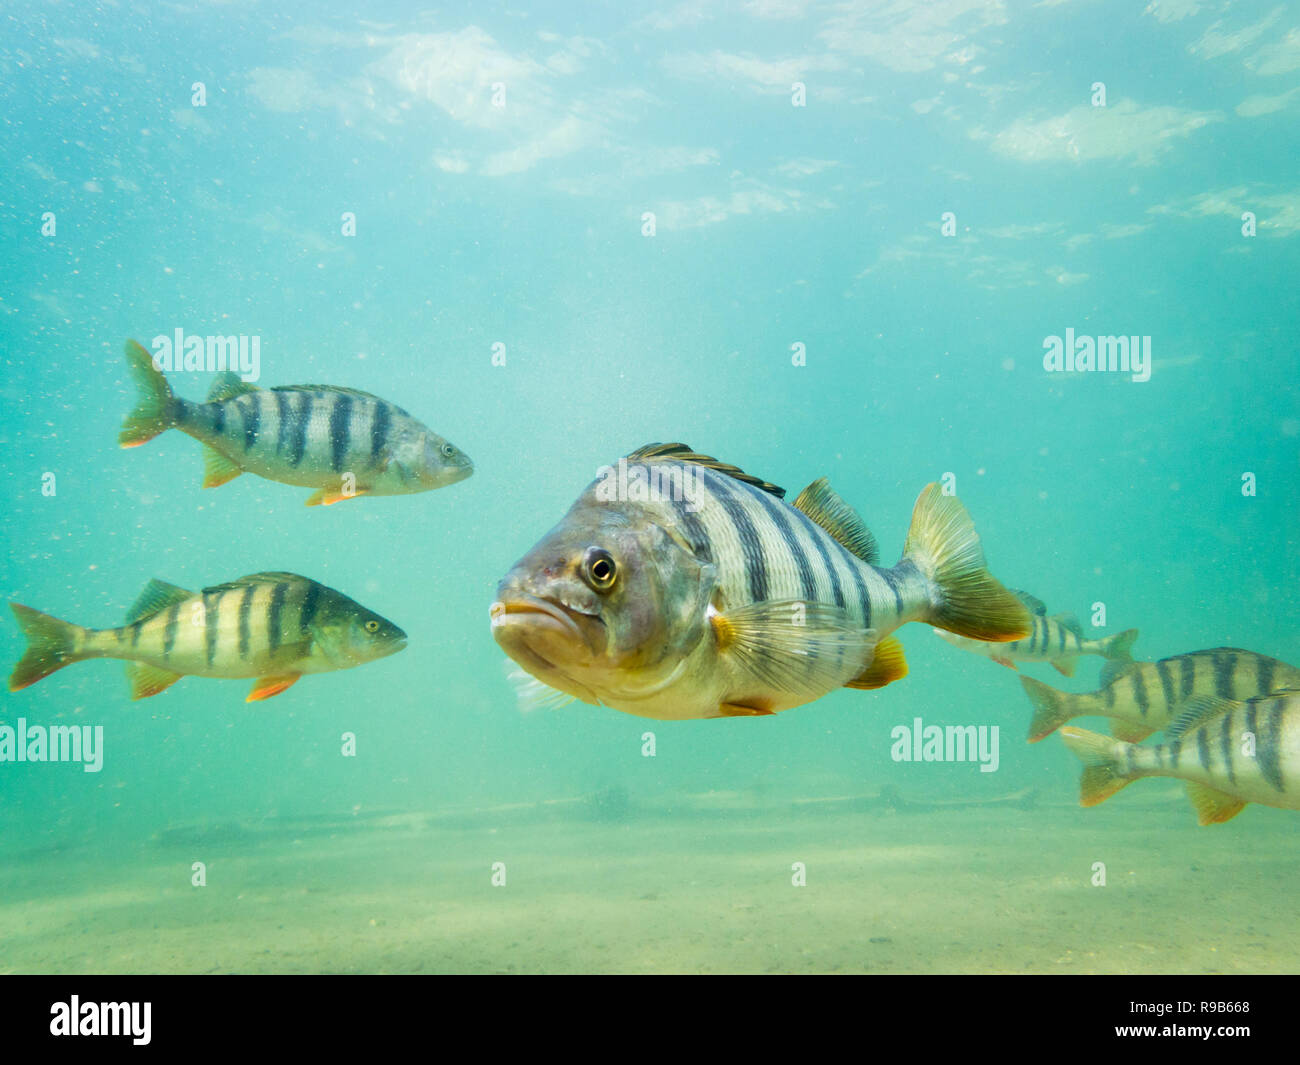 Big perch fish with healed face injury swimming in clear water. Stock Photo